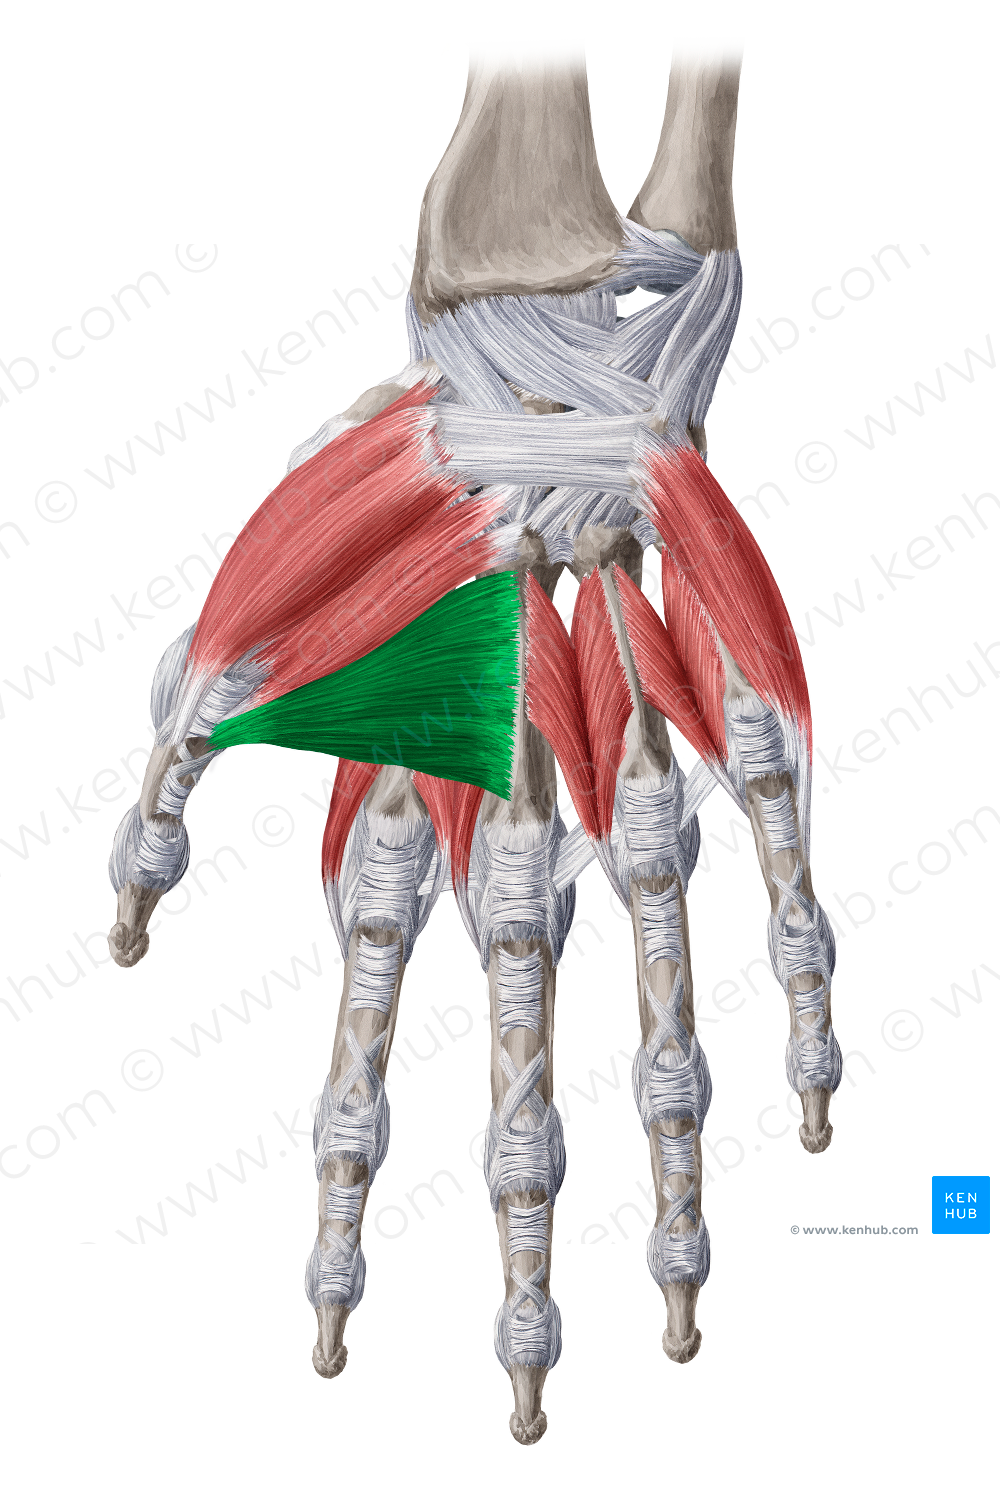 Transverse head of adductor pollicis muscle (#2453)